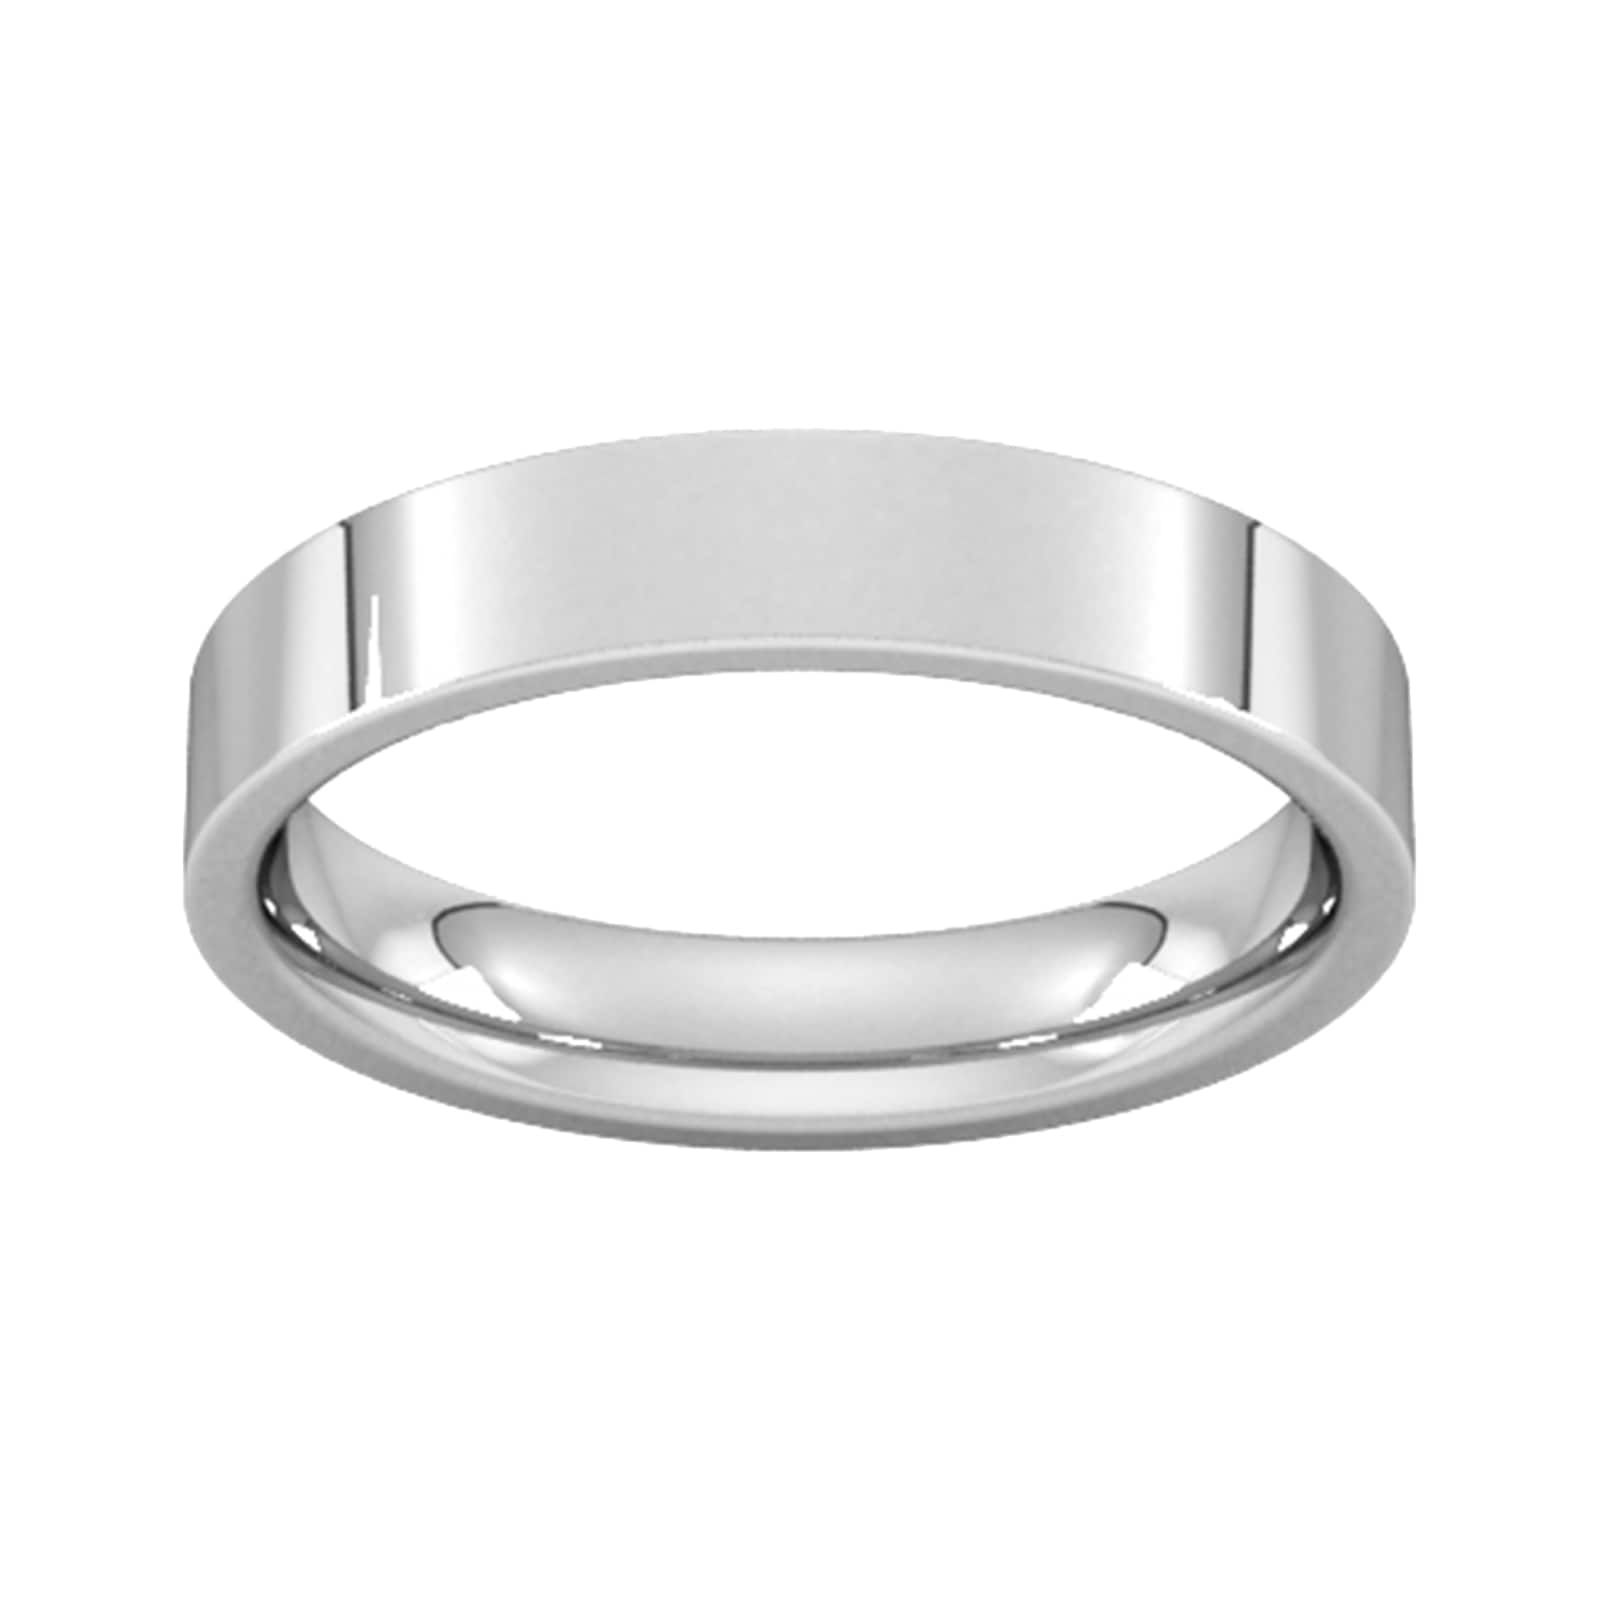 4mm Flat Court Heavy Wedding Ring In 9 Carat White Gold - Ring Size H